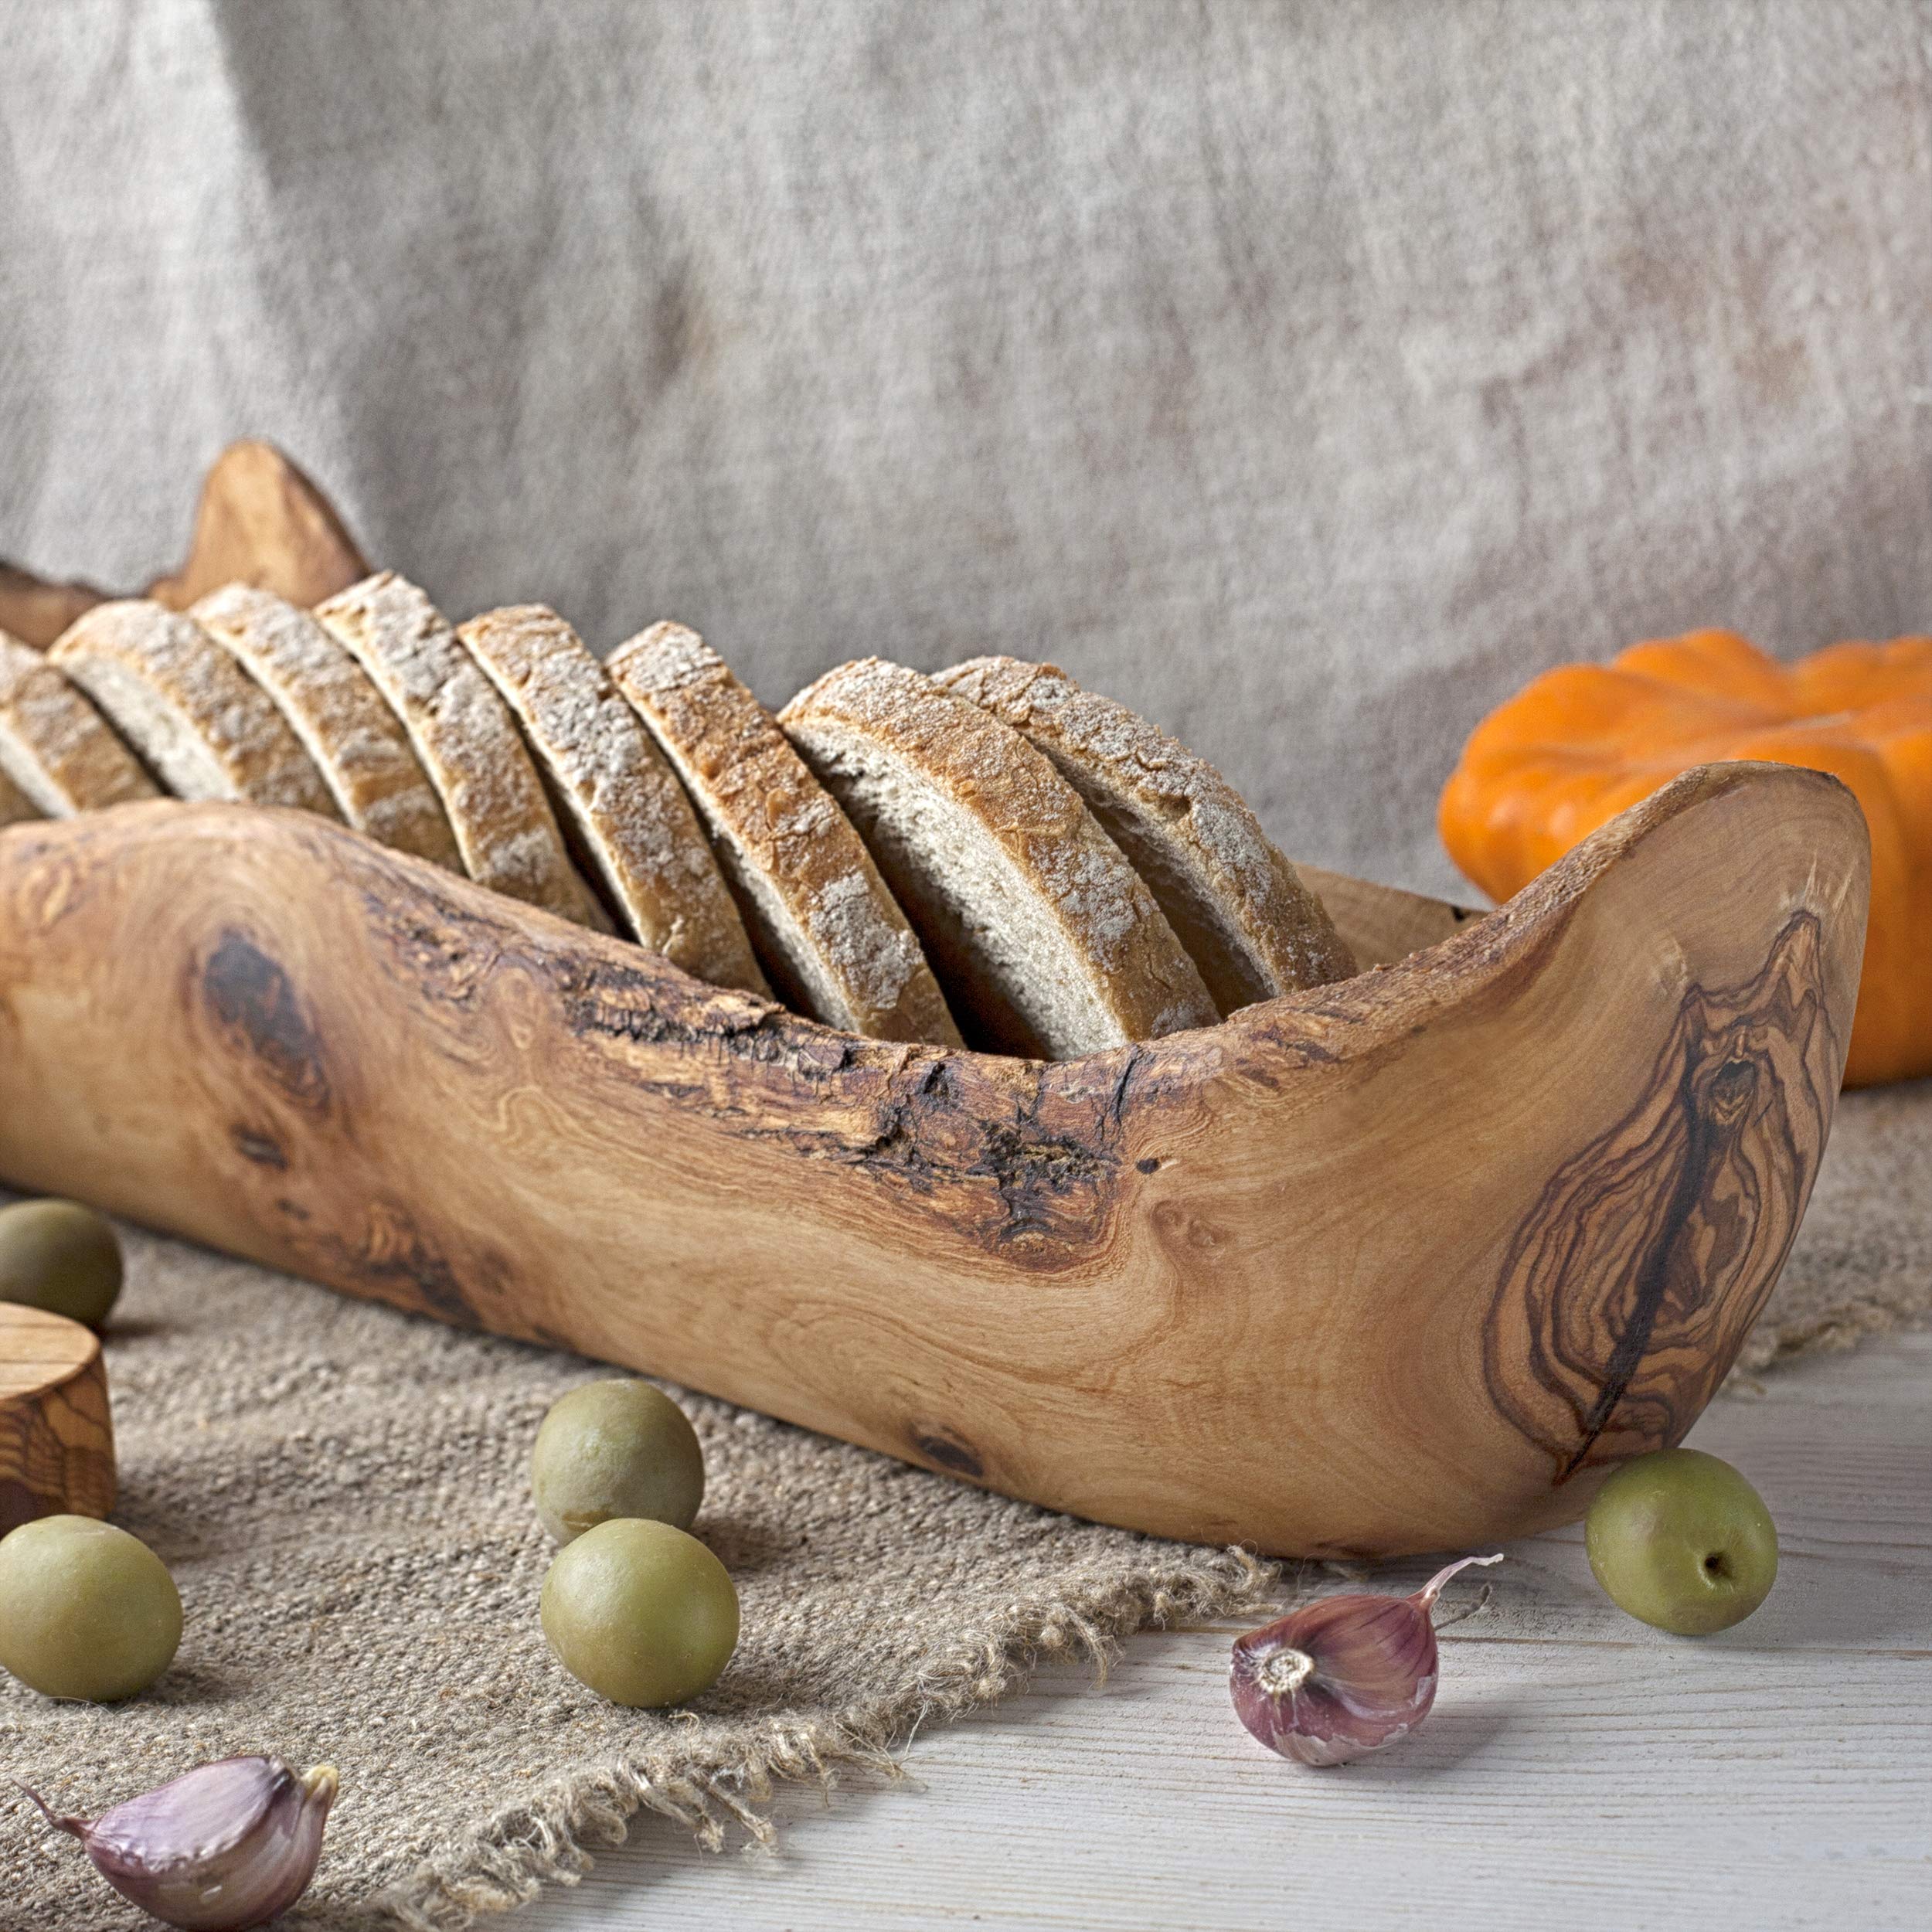 Forest Decor Olive Wood Decorative Bowls - 16" Long Natural Hand Carved Bread Bowl - Rustic Kitchen Decor for Serving Salad, Snack - Wood Farmhouse Fruit Bowl - Dining Dough Bowls Centerpieces